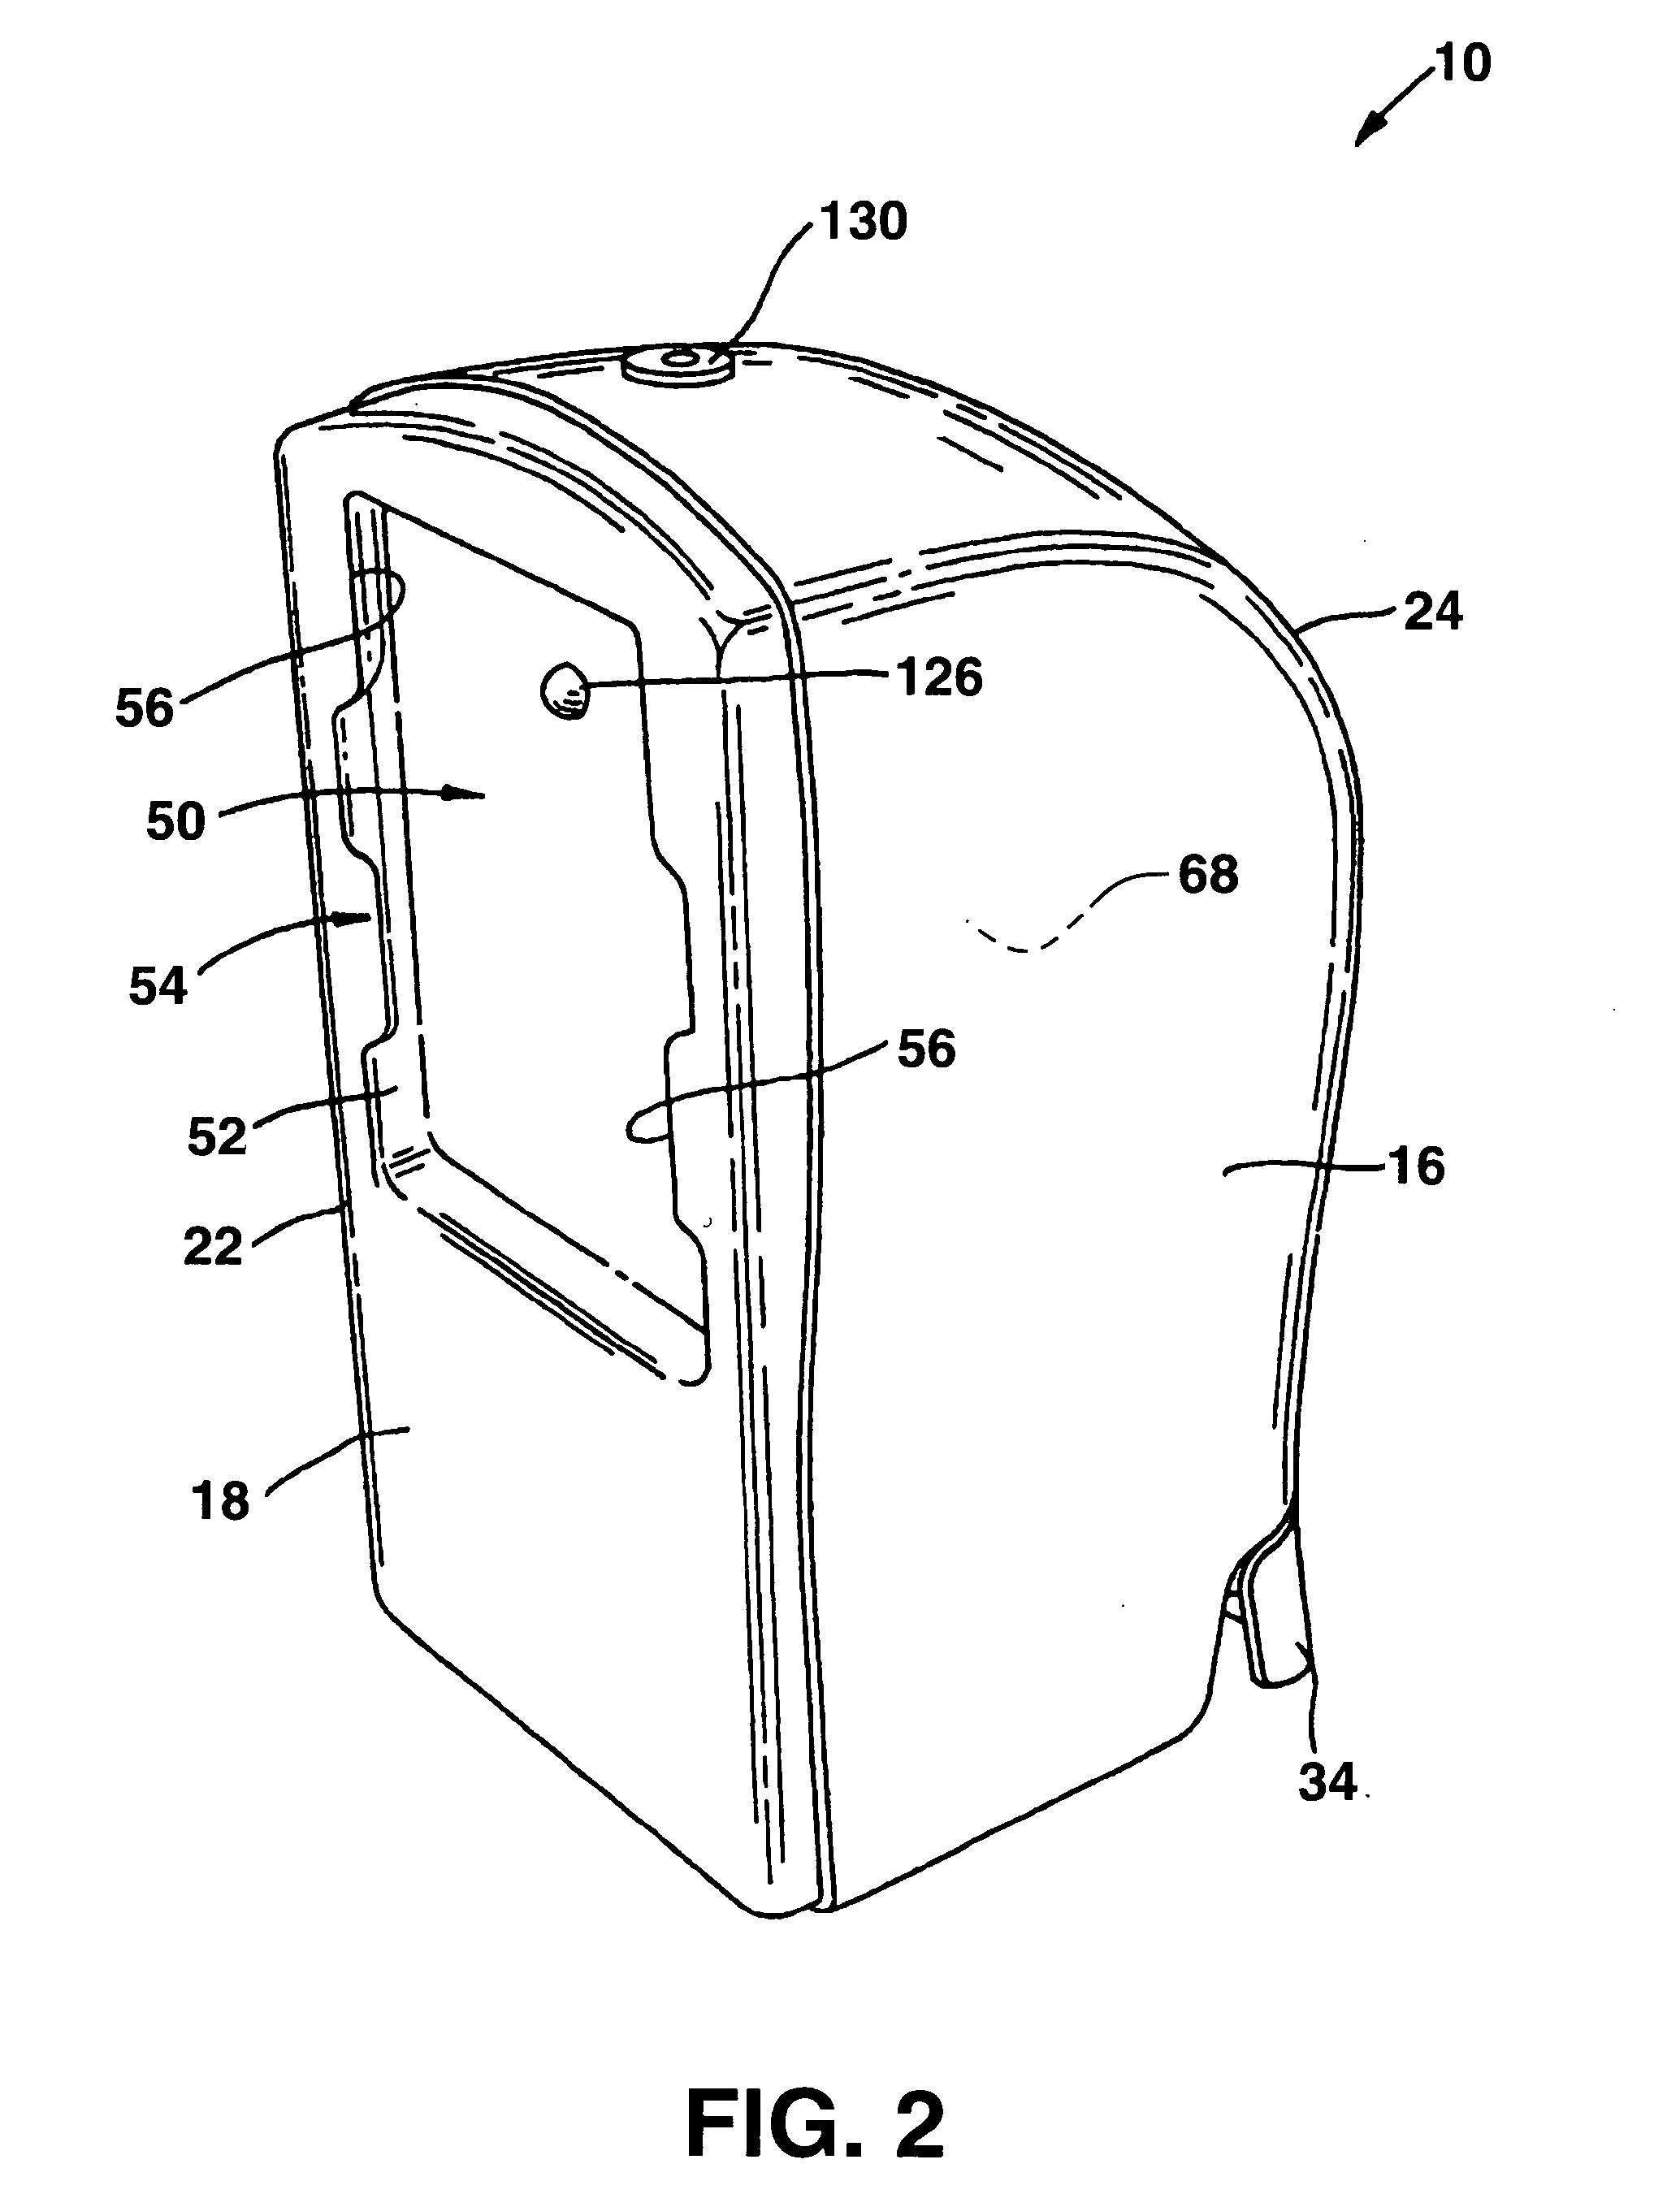 Self-contained viscous liquid dispenser with a foaming pump